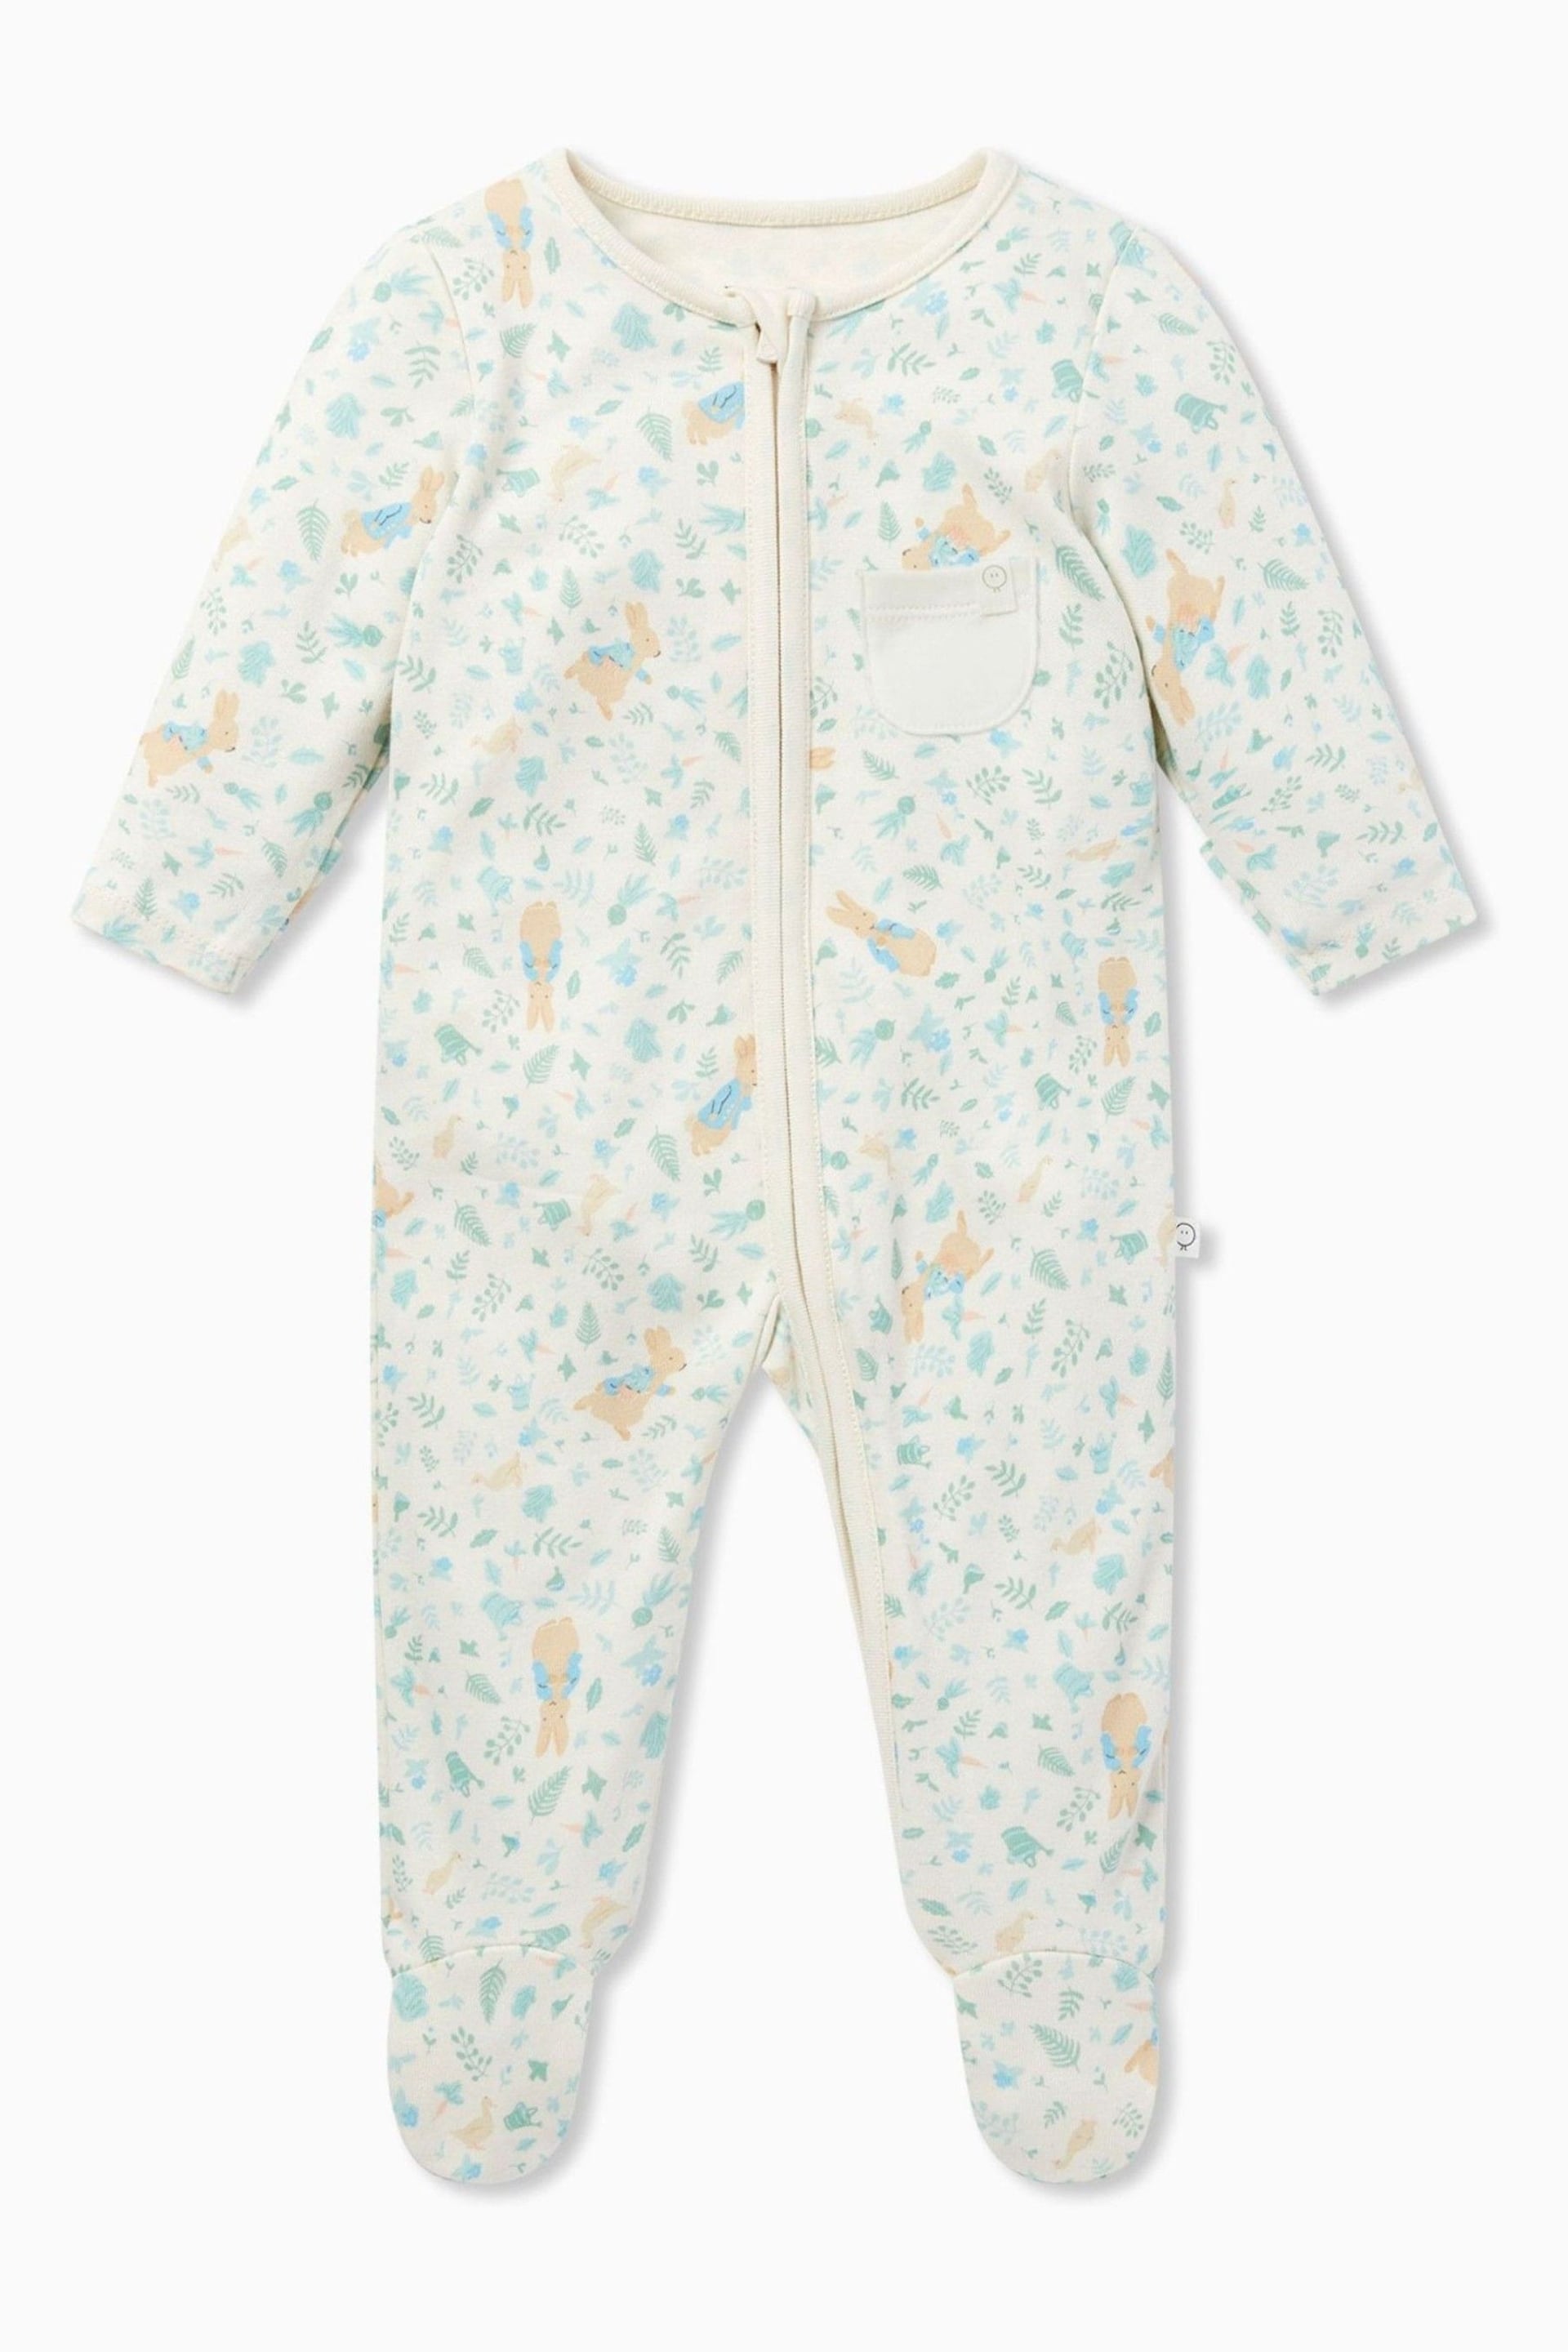 MORI Cream Organic Cotton and Bamboo Peter Rabbit Clever Zip-Up Sleepsuit - Image 4 of 6